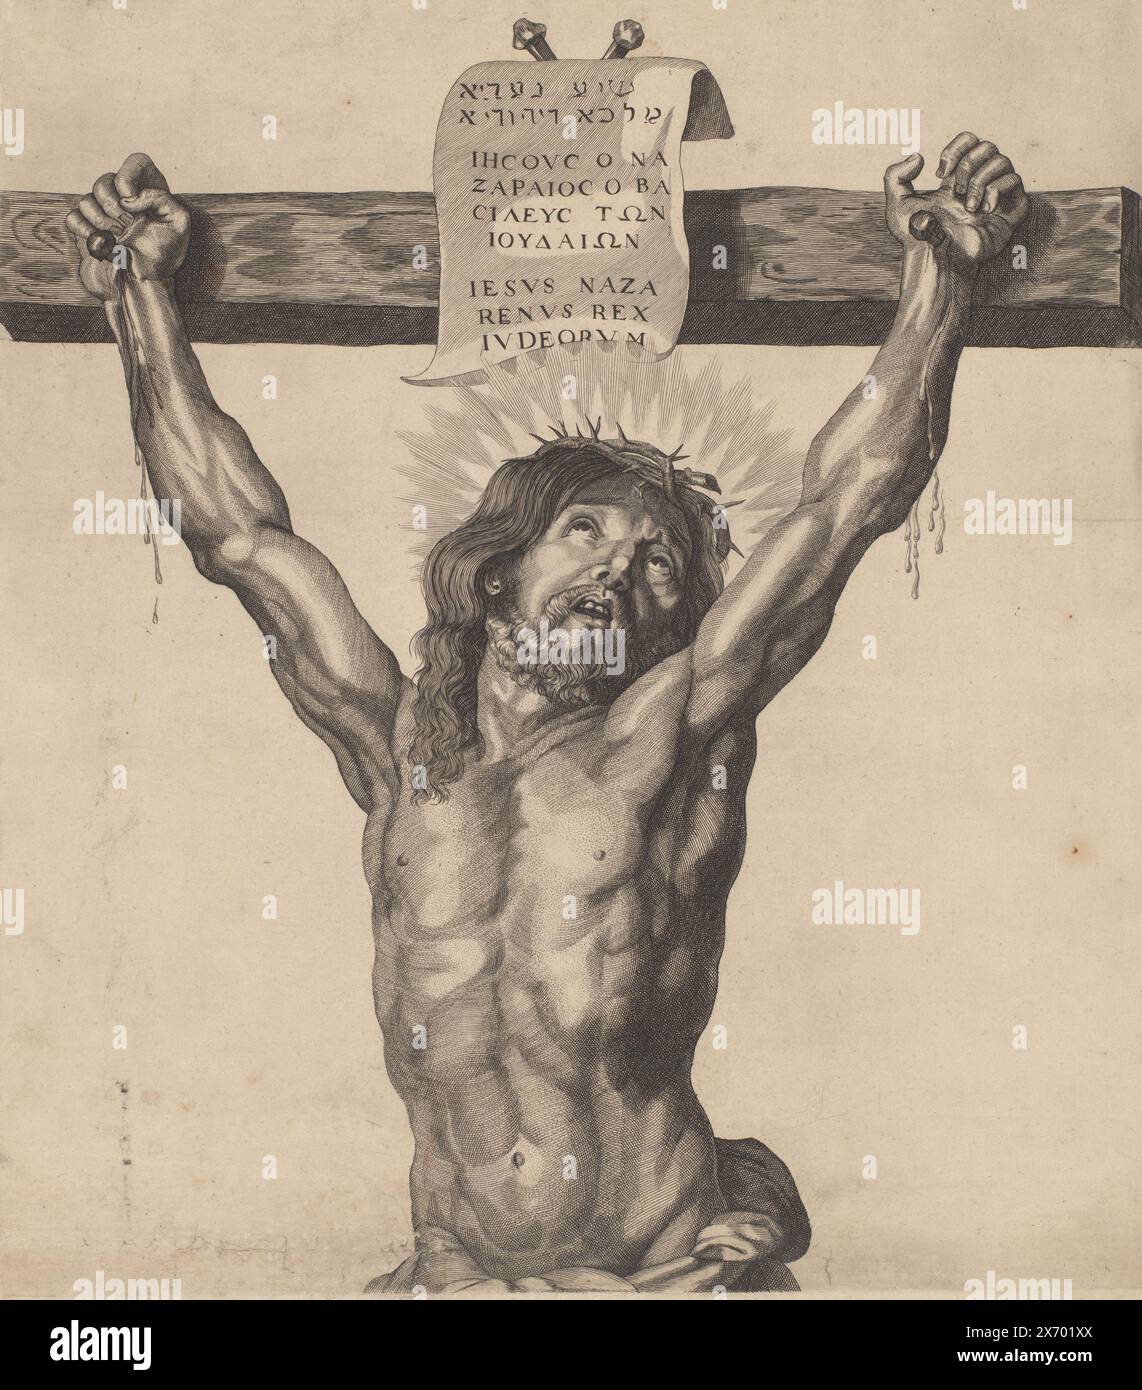 Christ on the Cross, Series of Ecce Homo, the Crucified Christ, Virgin Mary and John the Evangelist (series title), Top plate. In the foreground of the print is Christ on the cross. He looks desperately to the sky. There is an inscription nailed to the top of the cross. It says 'Jesus of Nazareth, King of the Jews' in Hebrew, Greek and Latin., print, print maker: Mattheus Borrekens, after drawing by: Erasmus Quellinus (II), publisher: Martinus van den Enden, Antwerp, 1625 - 1670, paper, engraving, width, 395 mm × height, 451 mm Stock Photo